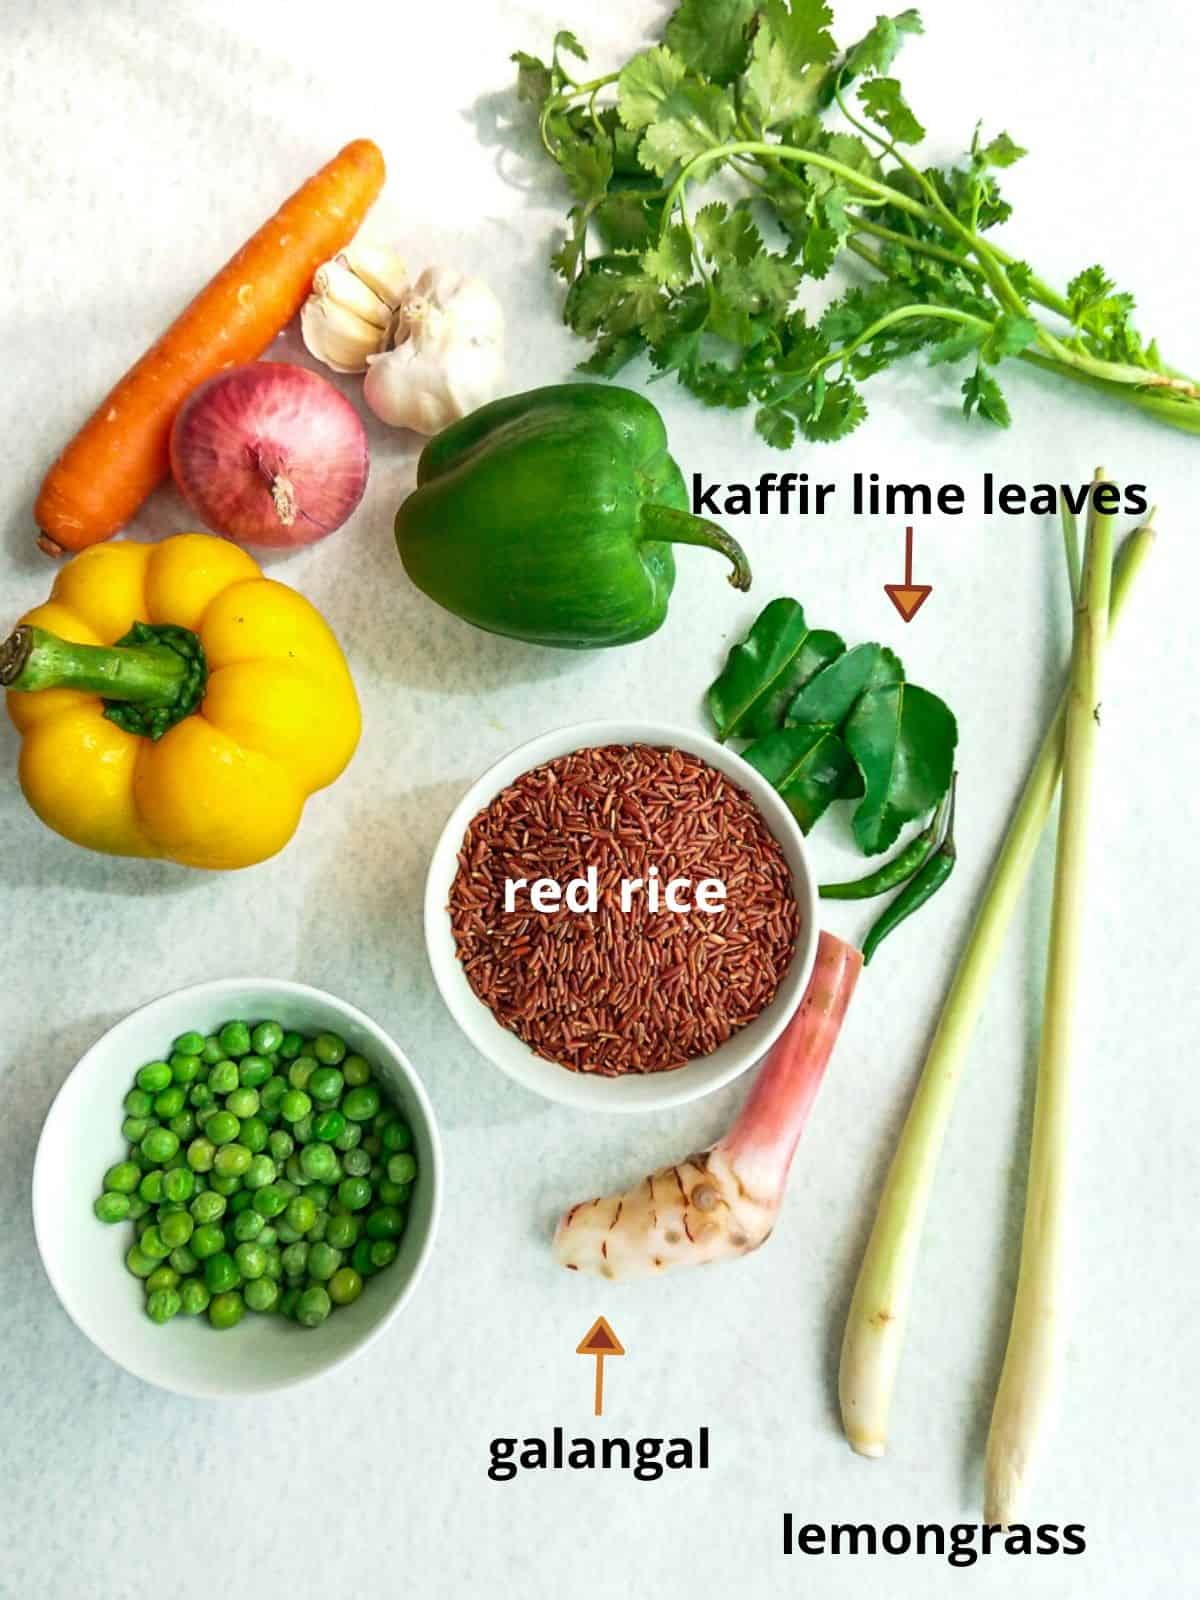 ingredients for fried rice recipe with red rice